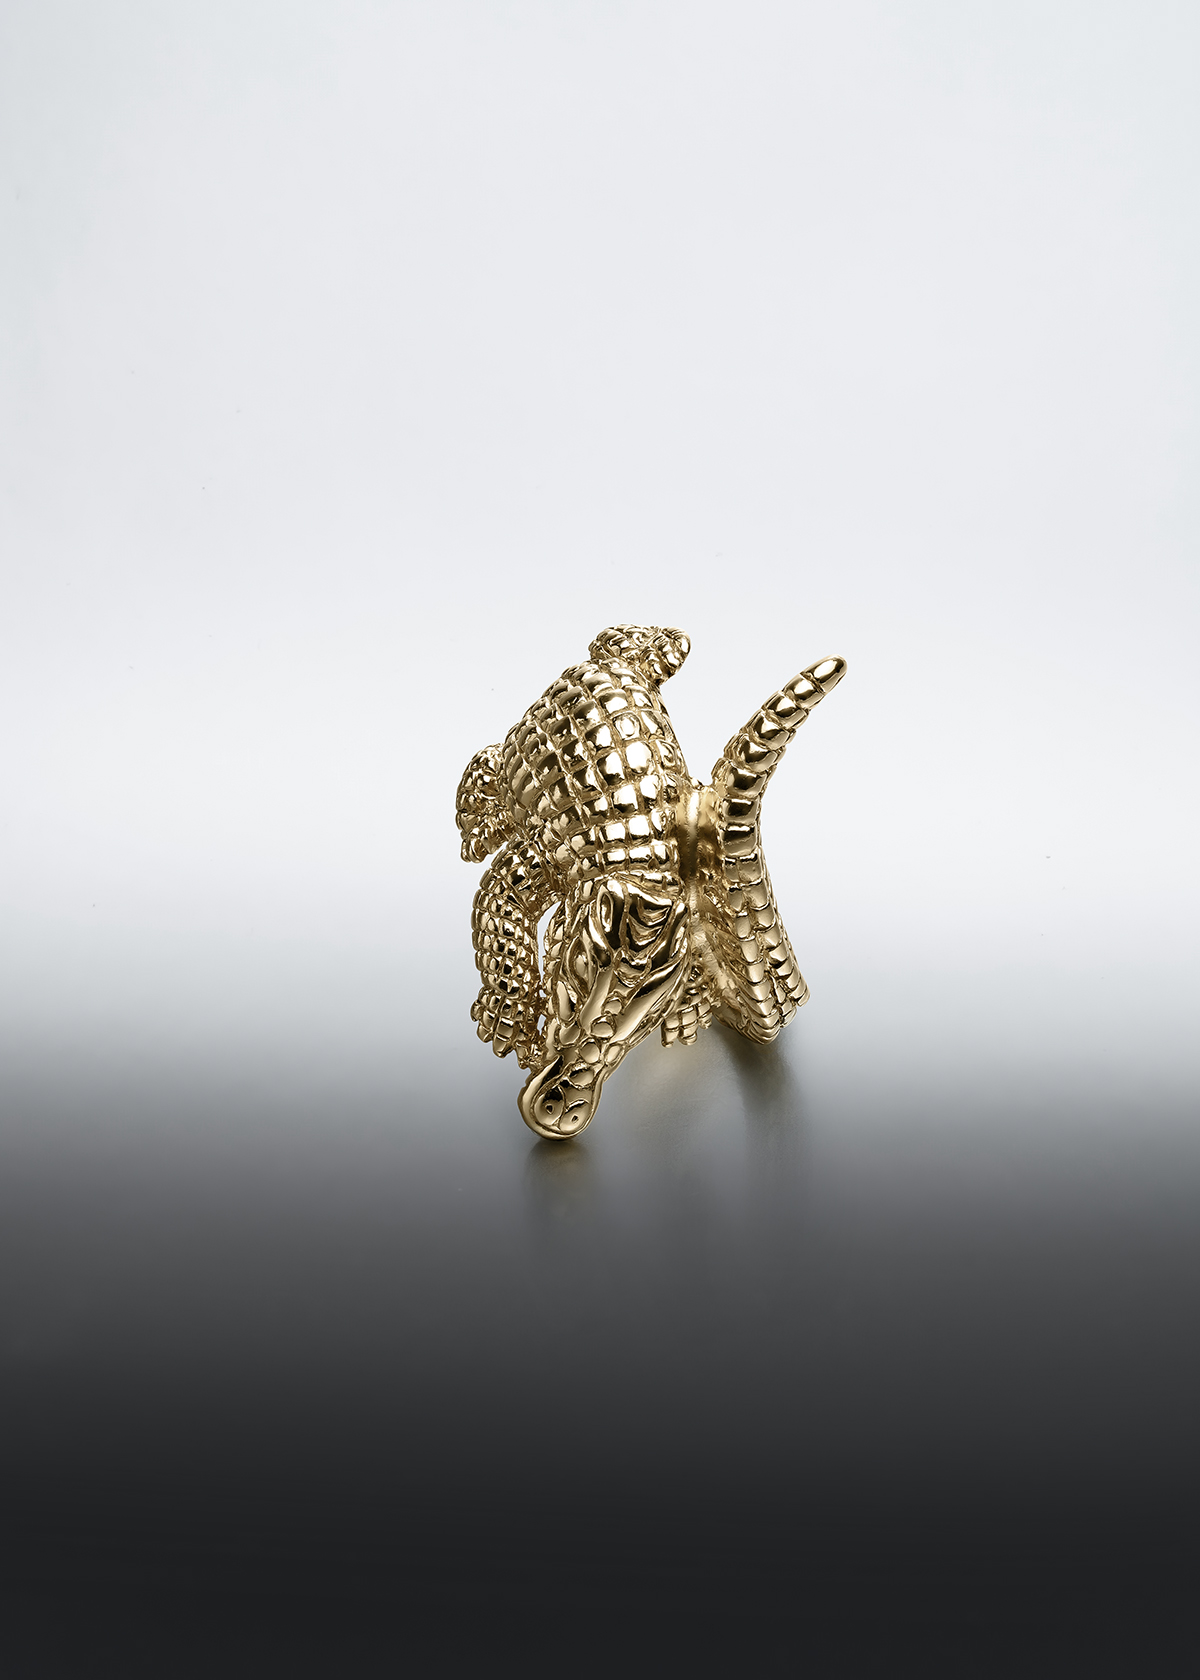 925 Silver wide ring, dipped in 18K yellow gold, in the shape of a crocodile.